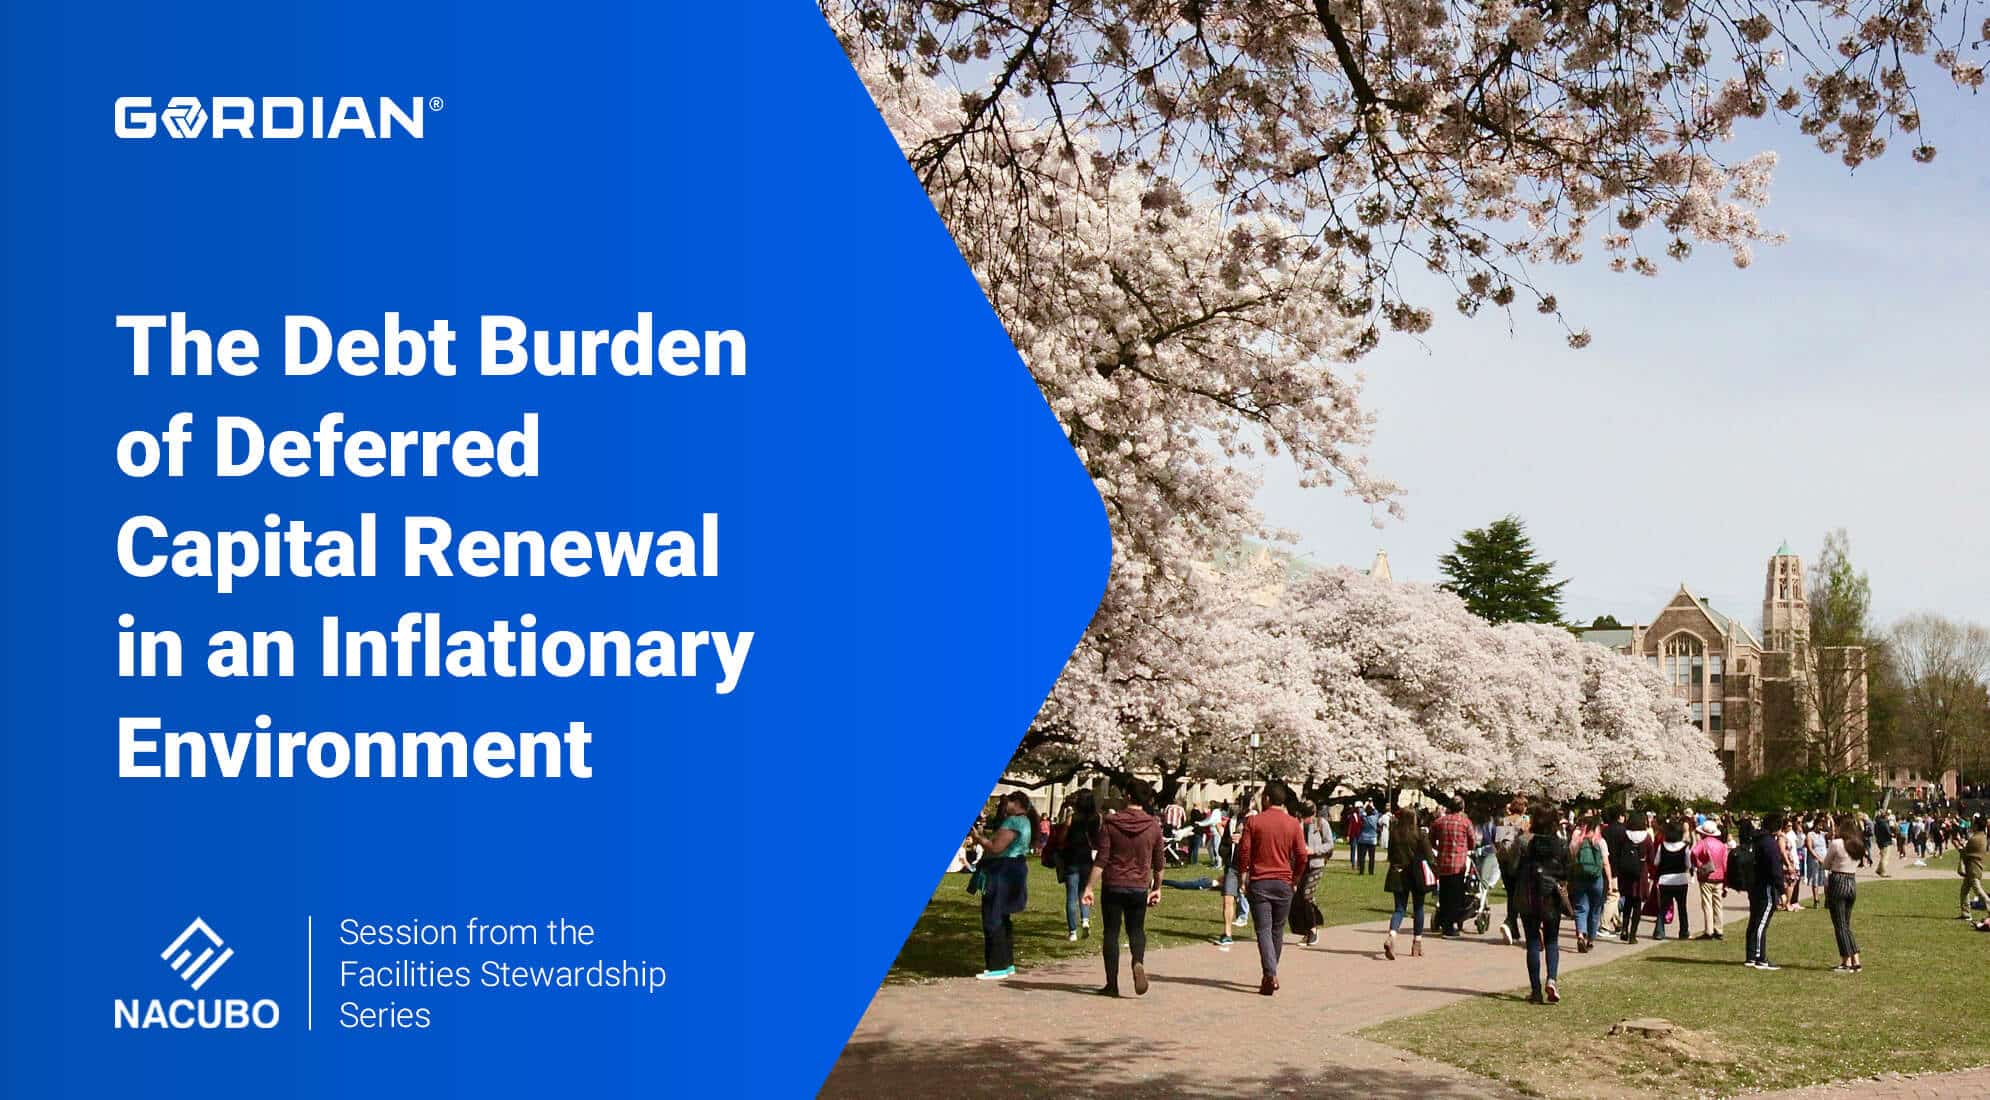 Facilities Stewardship Series: The Debt Burden of Deferred Capital Renewal in an Inflationary Environment 3